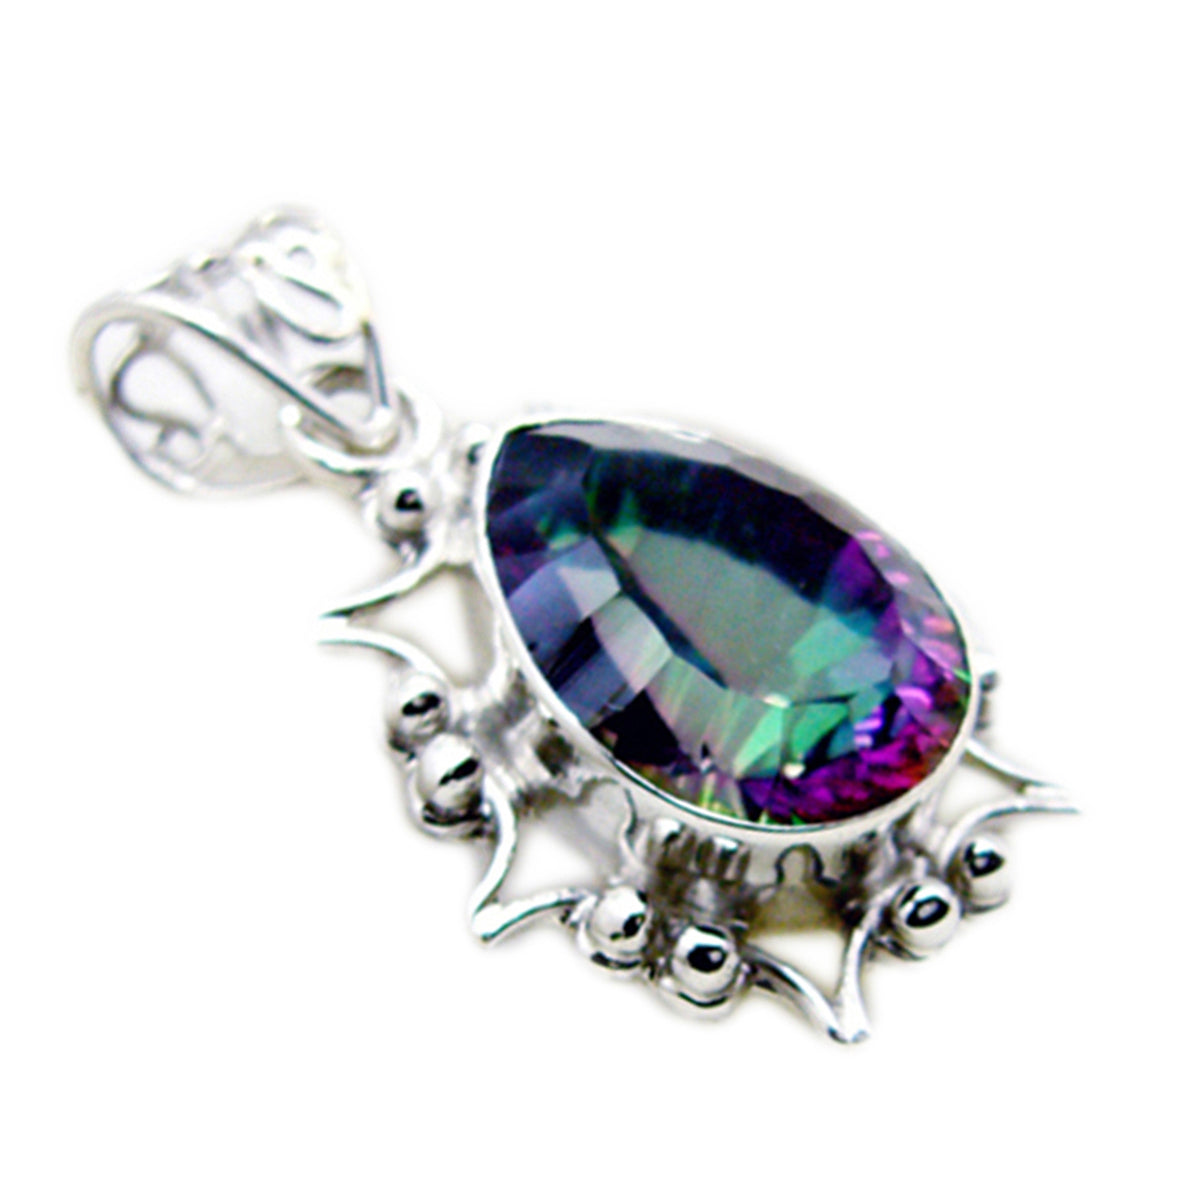 Riyo Beaut Gemstone Pear Faceted Multi Color Mystic Quartz 1182 Sterling Silver Pendant Gift For Good Friday